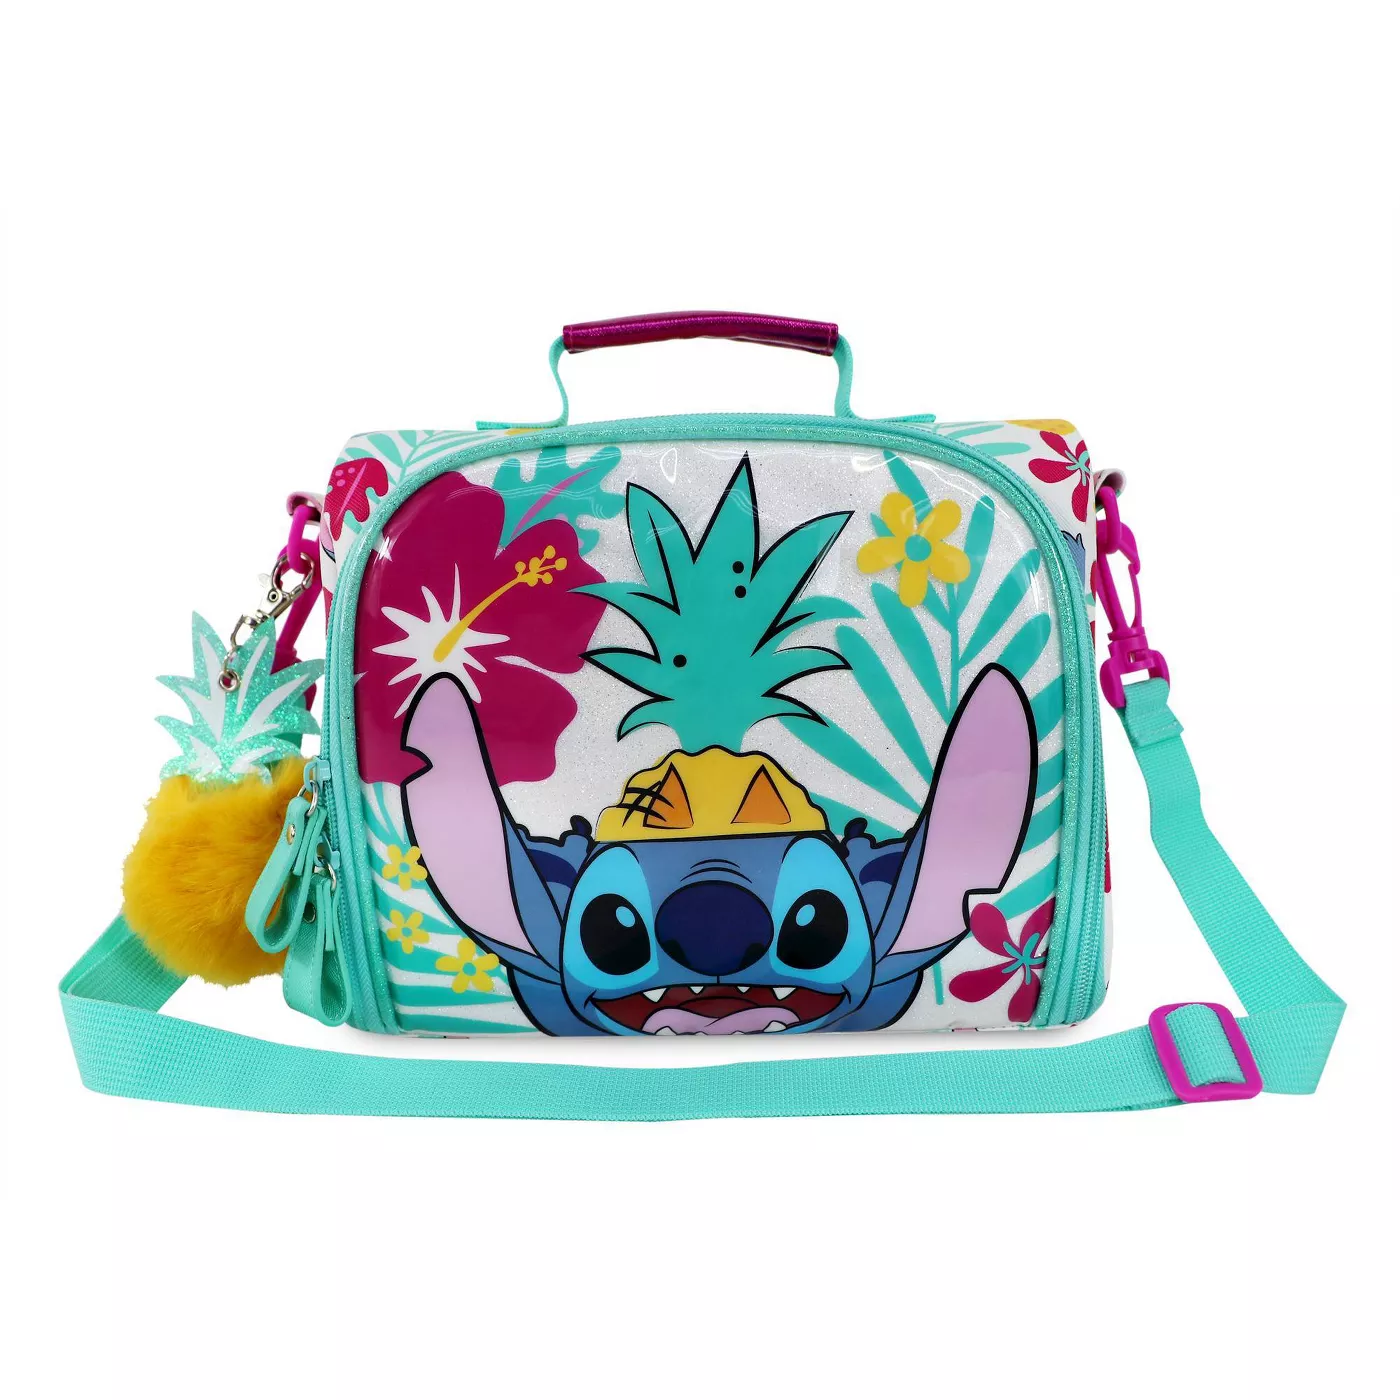 Lilo and Stitch Lunch Bag.